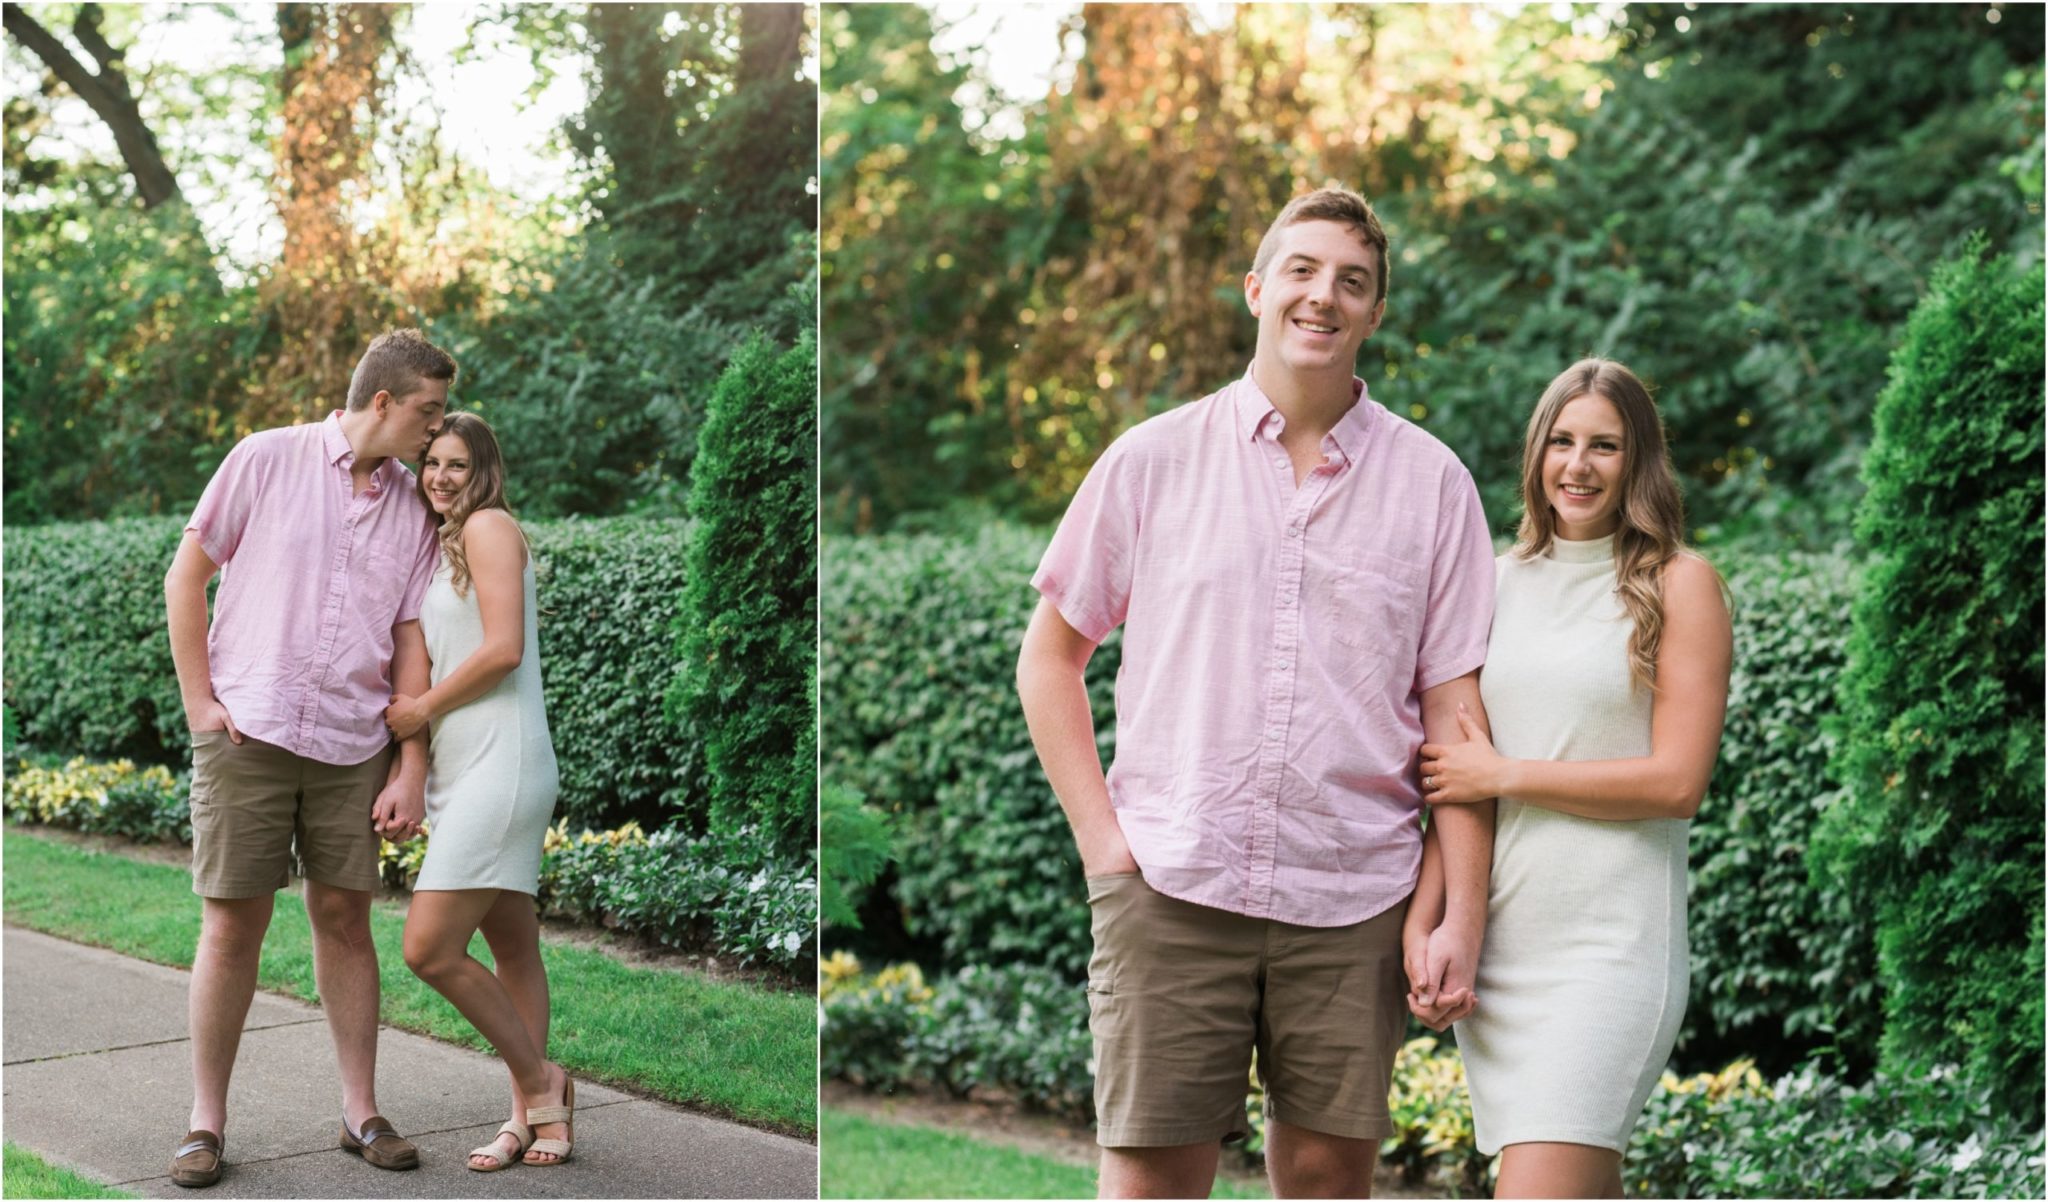 Collage image of a couple engagement photo in Golden hour lighting.